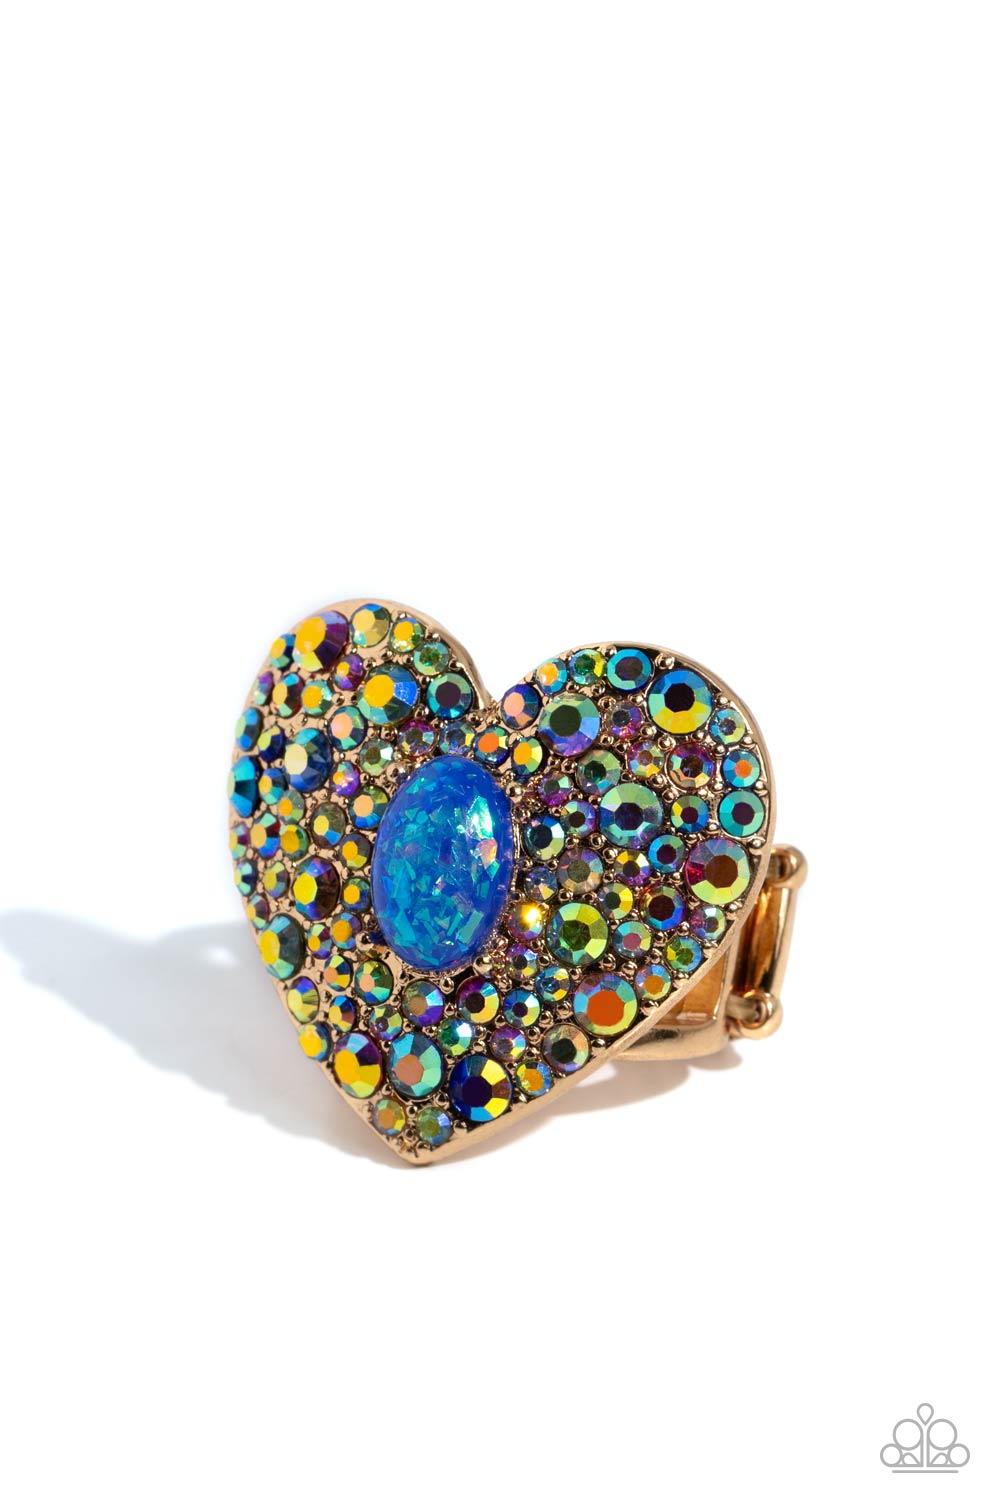 Bejeweled Beau Blue &amp; Iridescent Heart Ring - Paparazzi Accessories- lightbox - CarasShop.com - $5 Jewelry by Cara Jewels